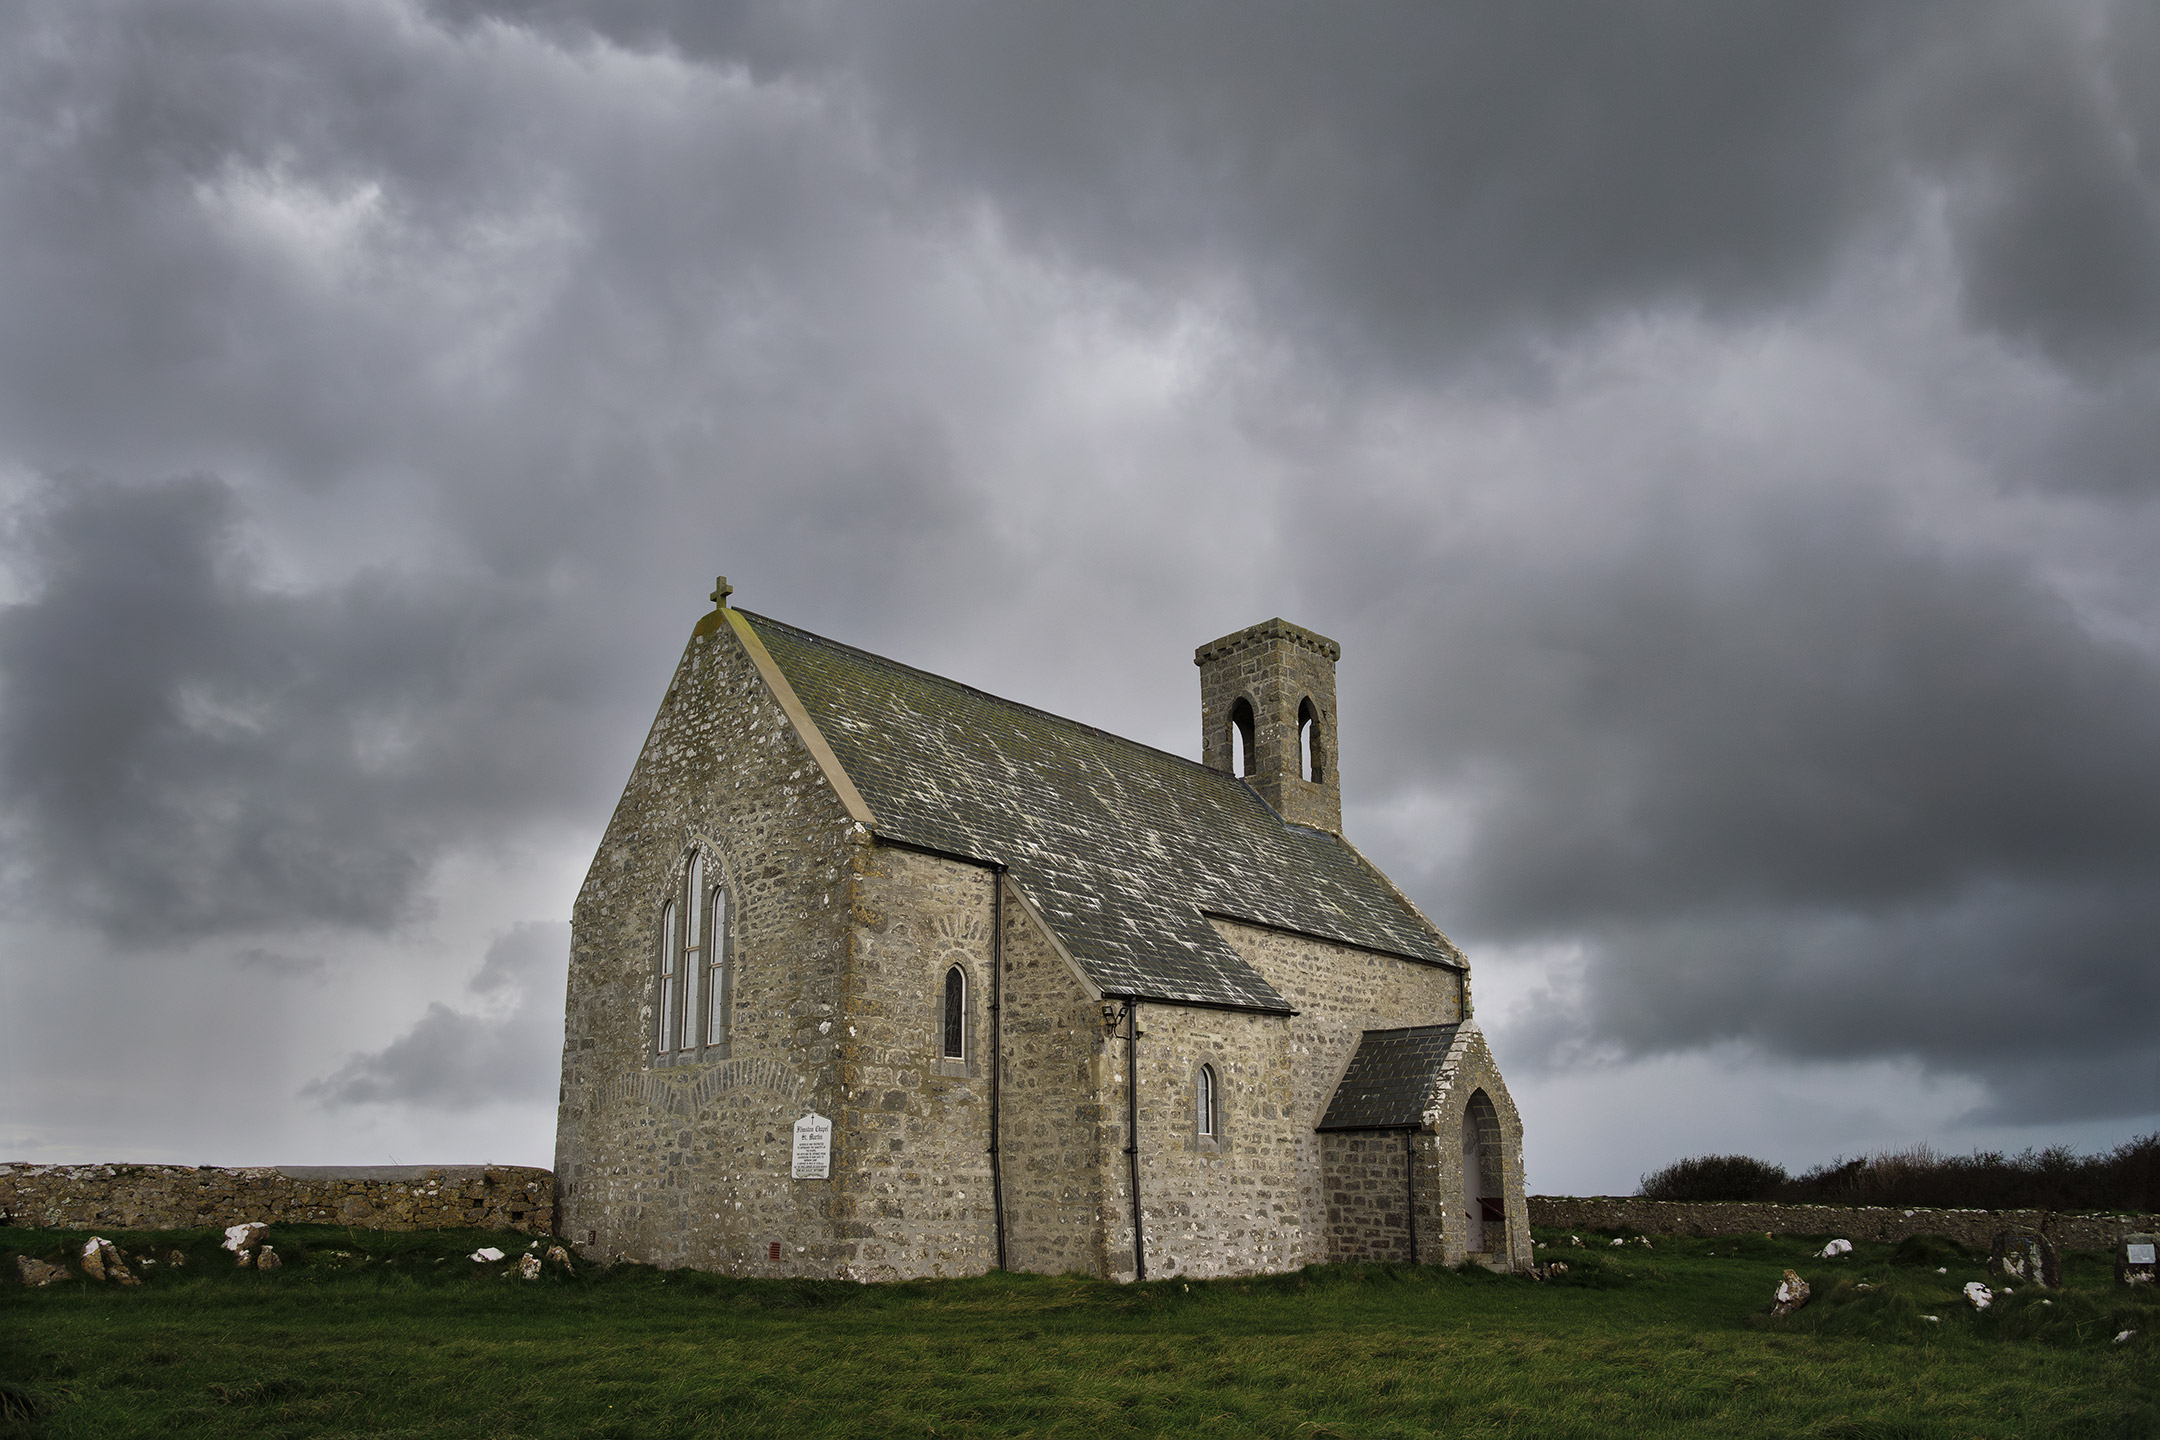 The quaint, stone building of Flimston Chapel sits under a brooding sky in Pembroke, Wales